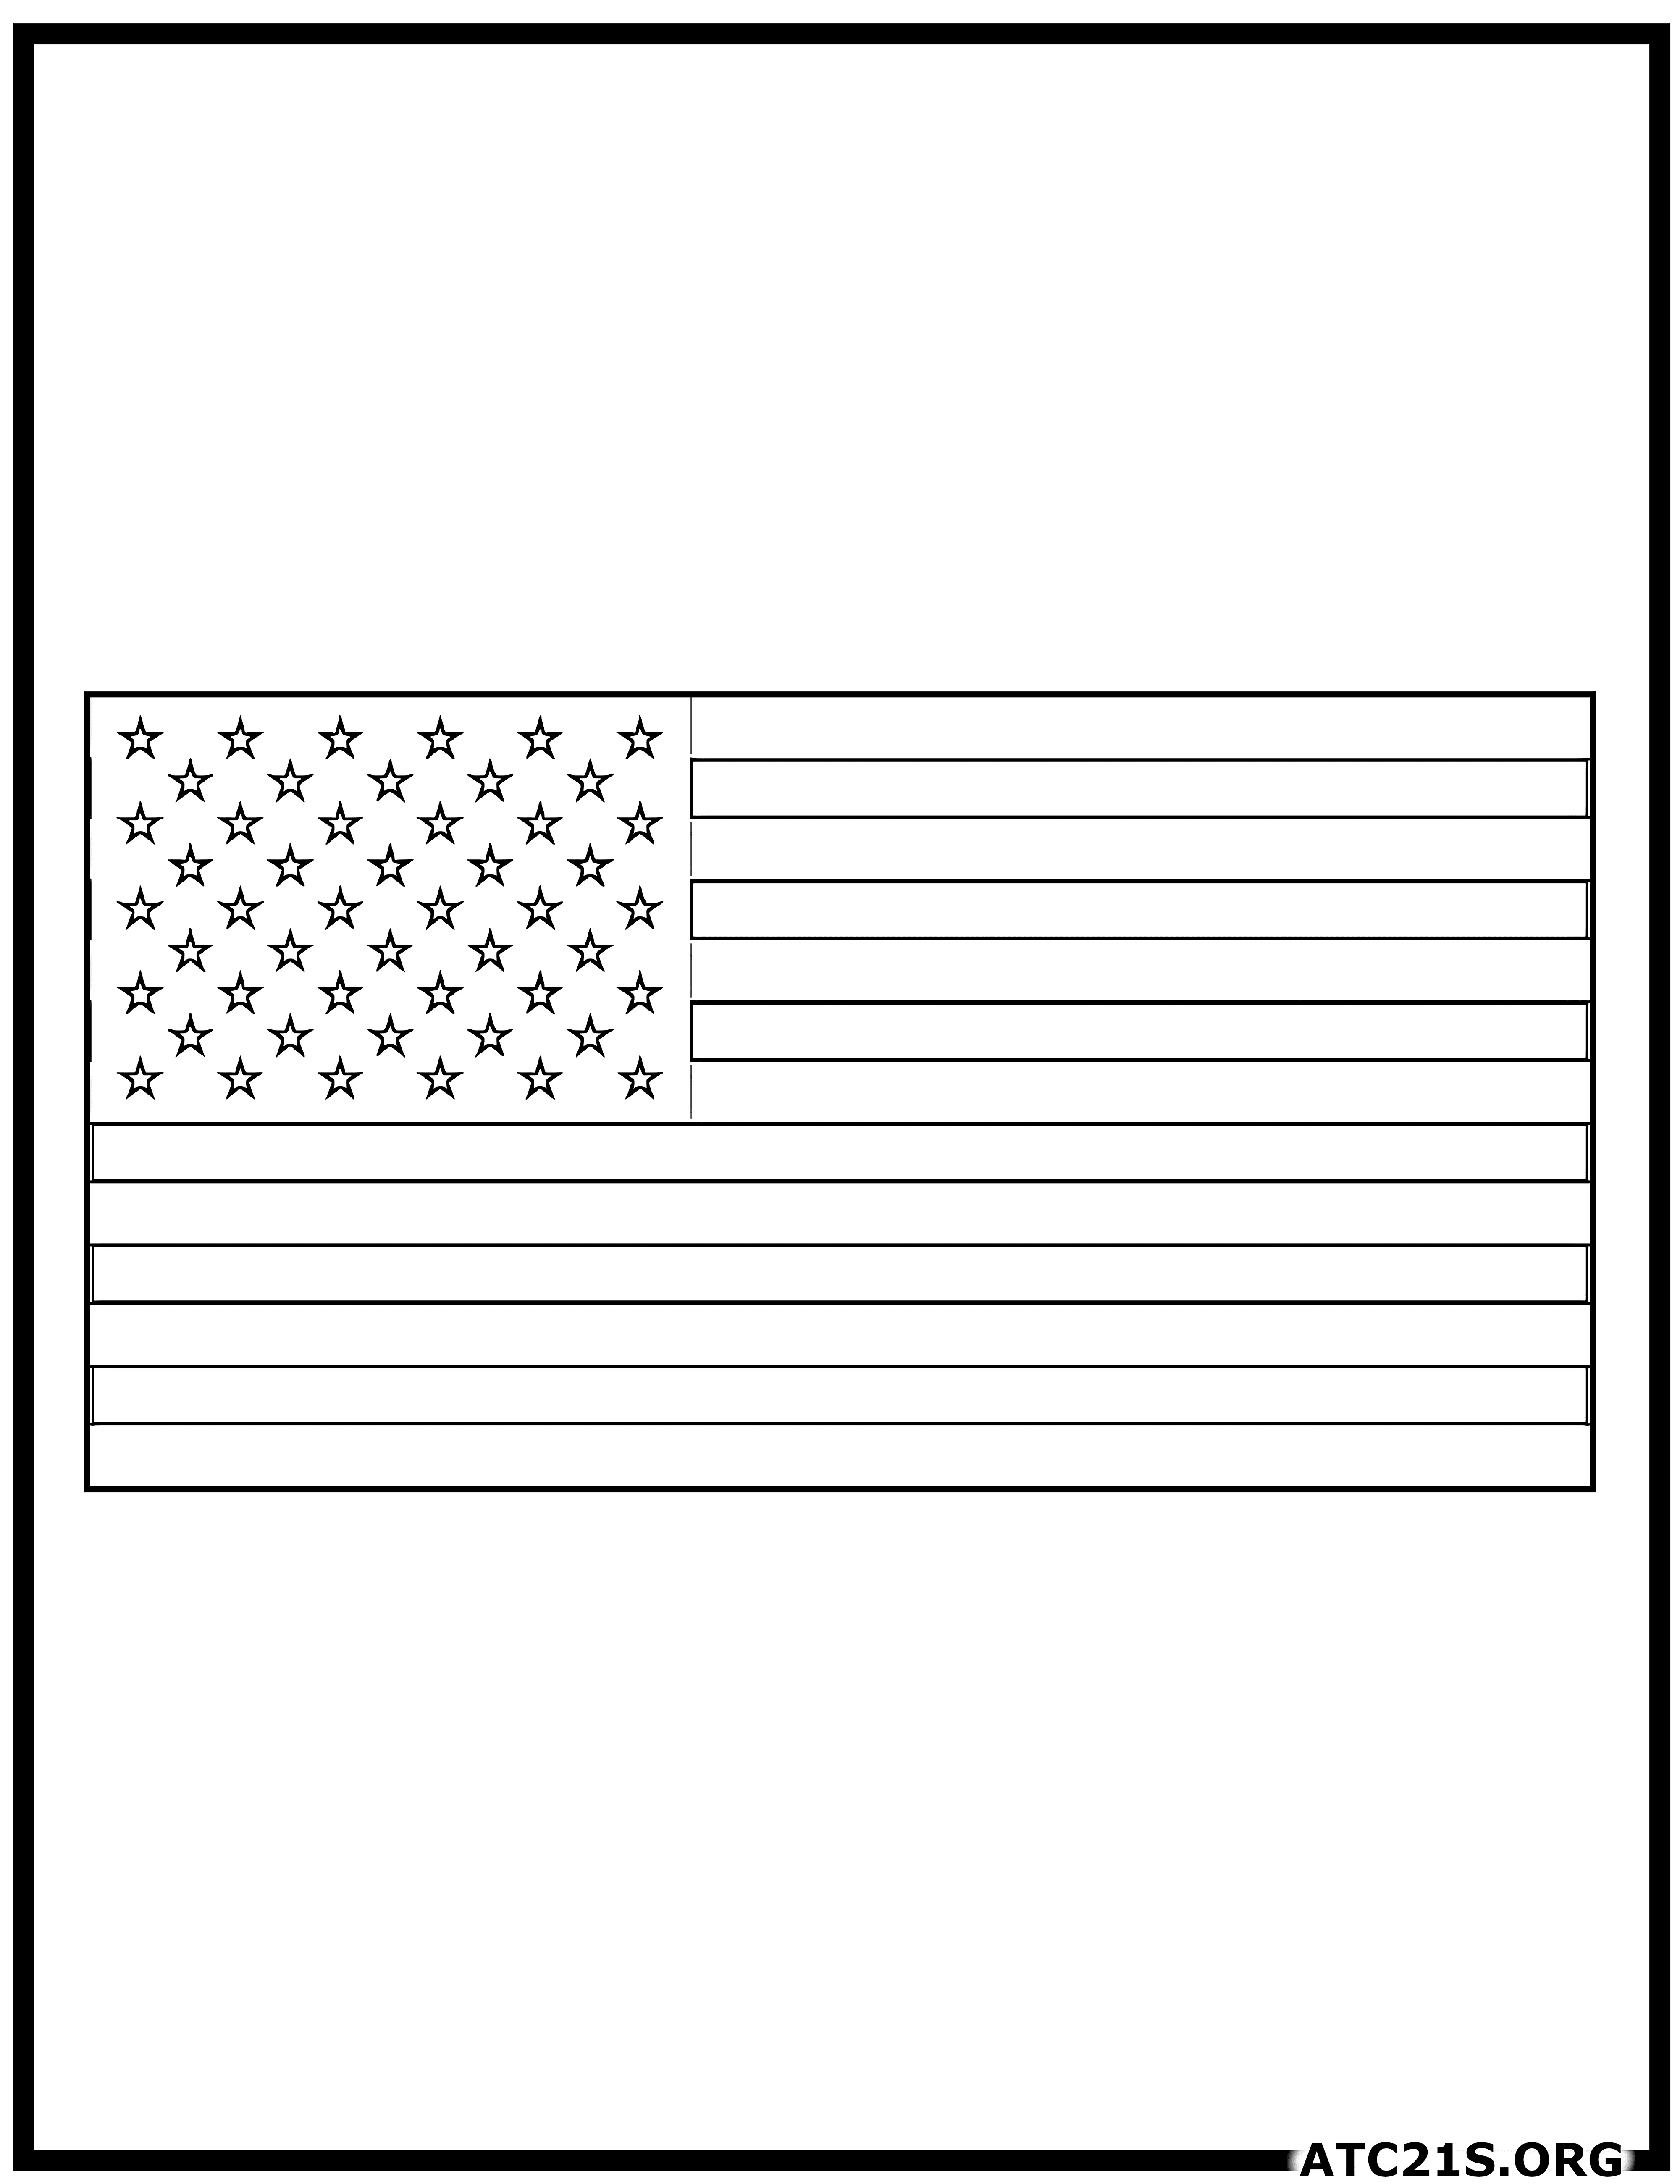 United States_flag_coloring_page